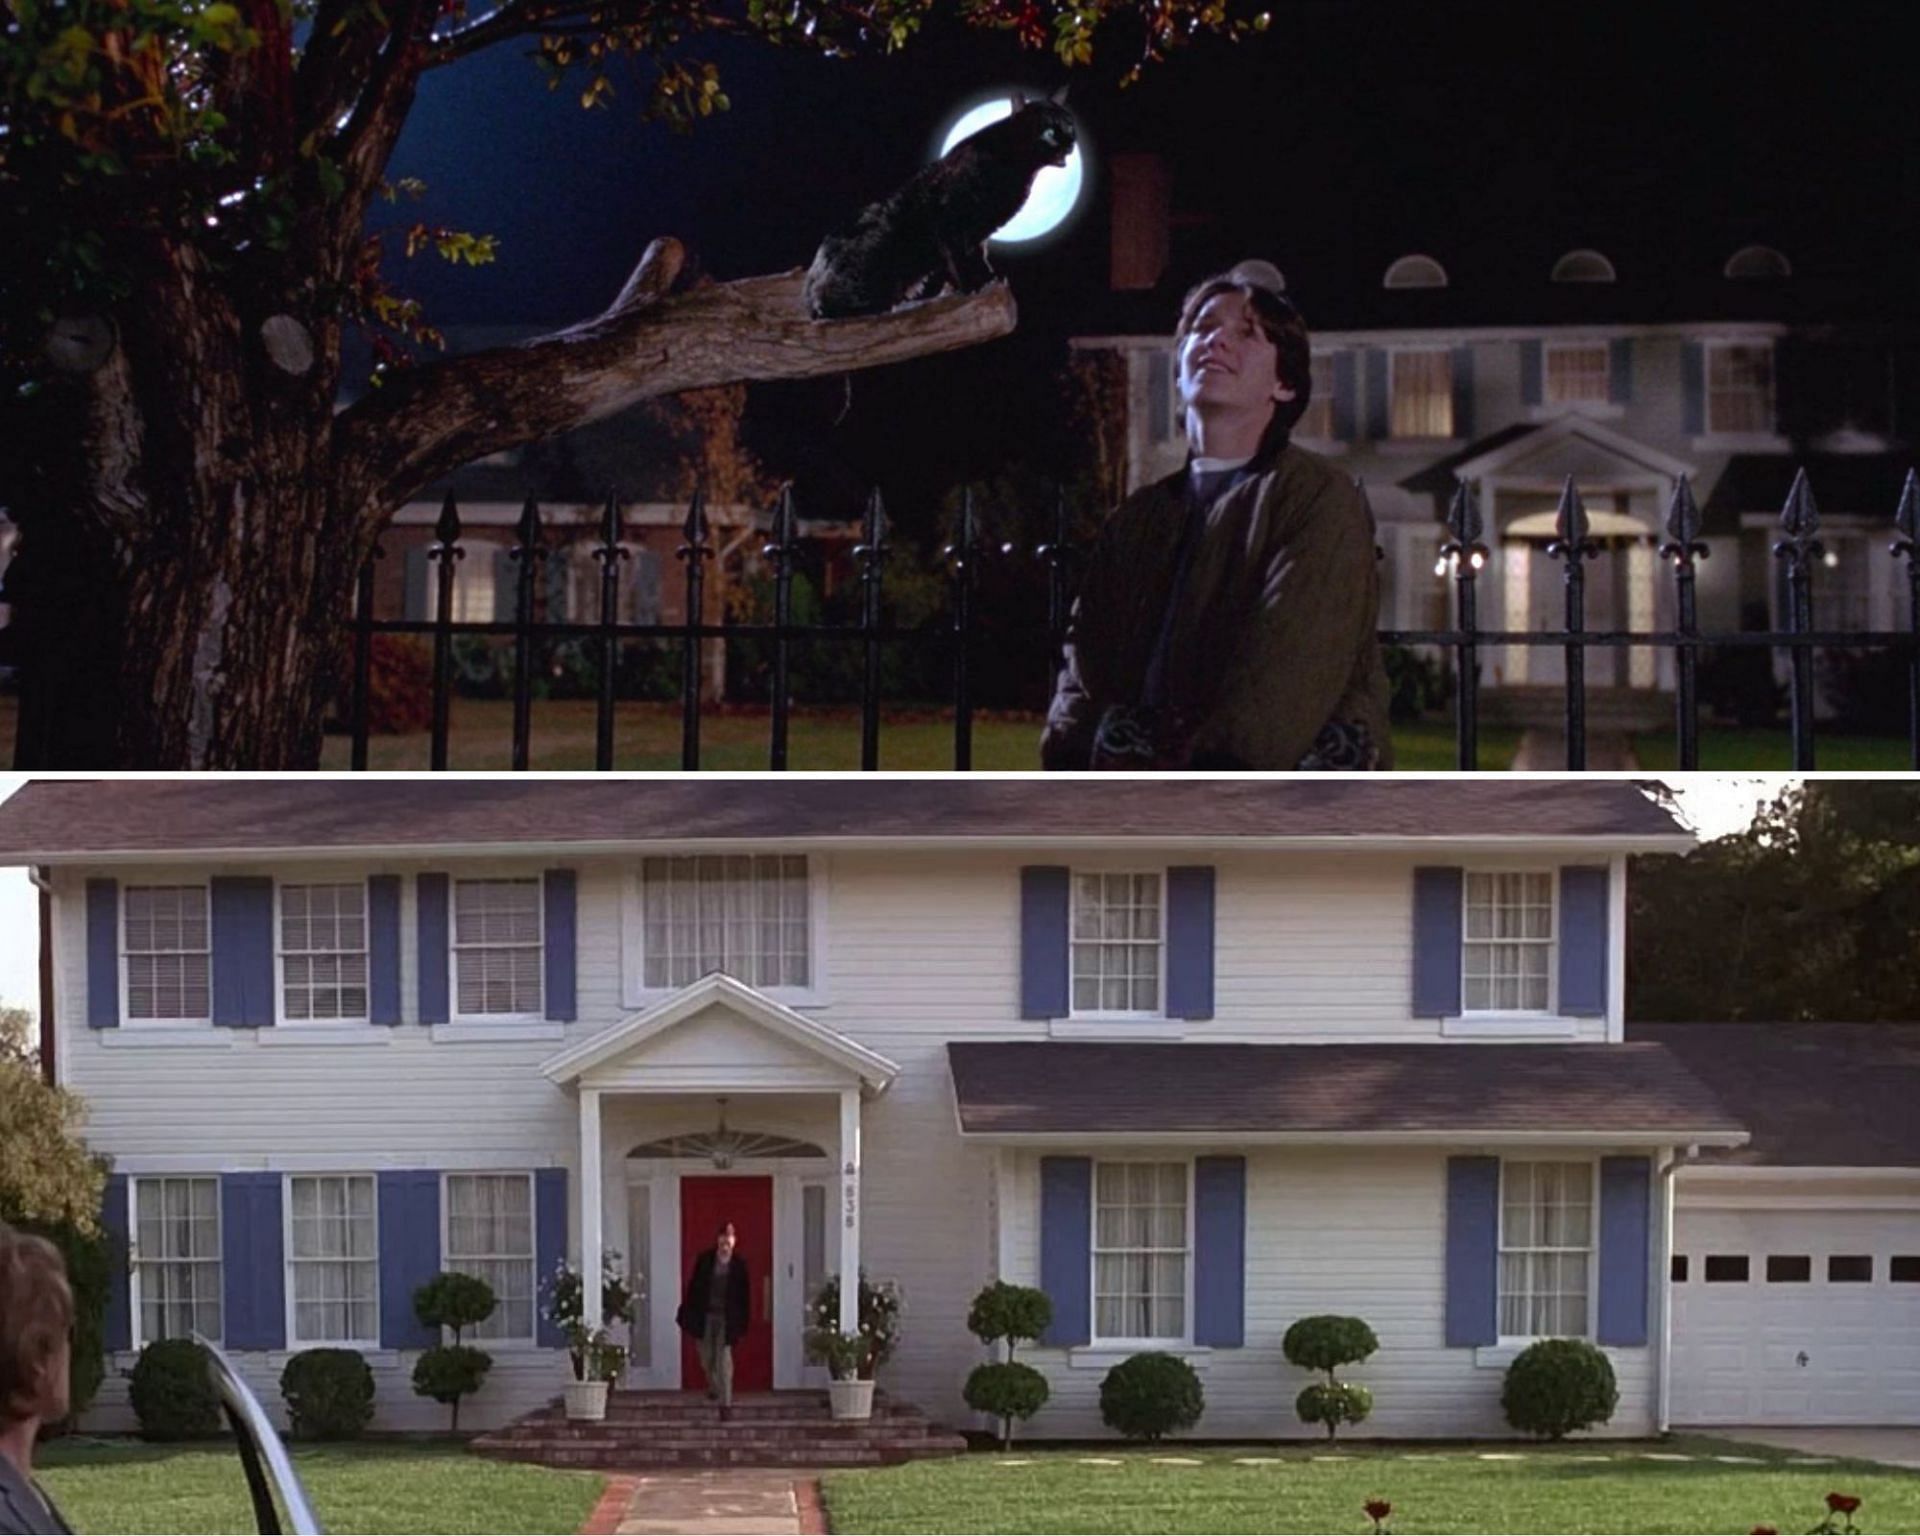 Stills from Hocus Pocus and American Beauty featuring the same house (Images via Disney/ Dreamworks)